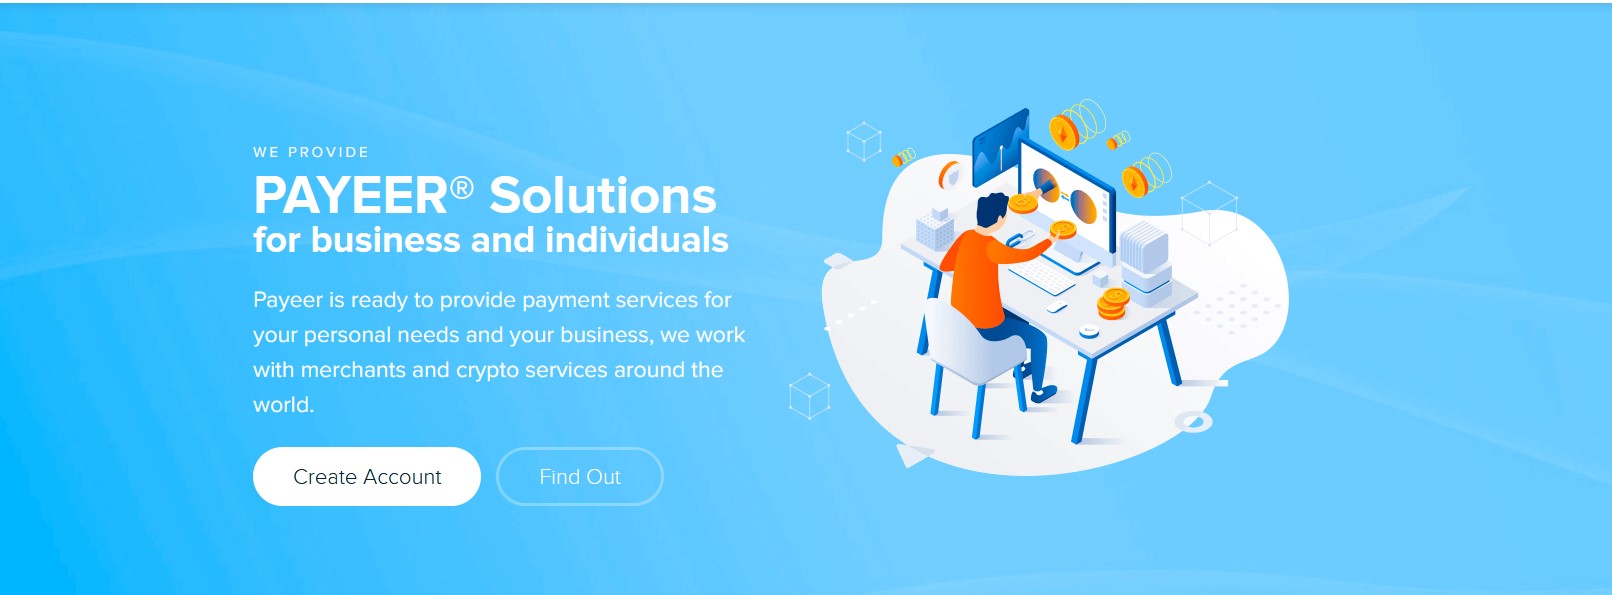 Payeer Wallet and Payment Gateway